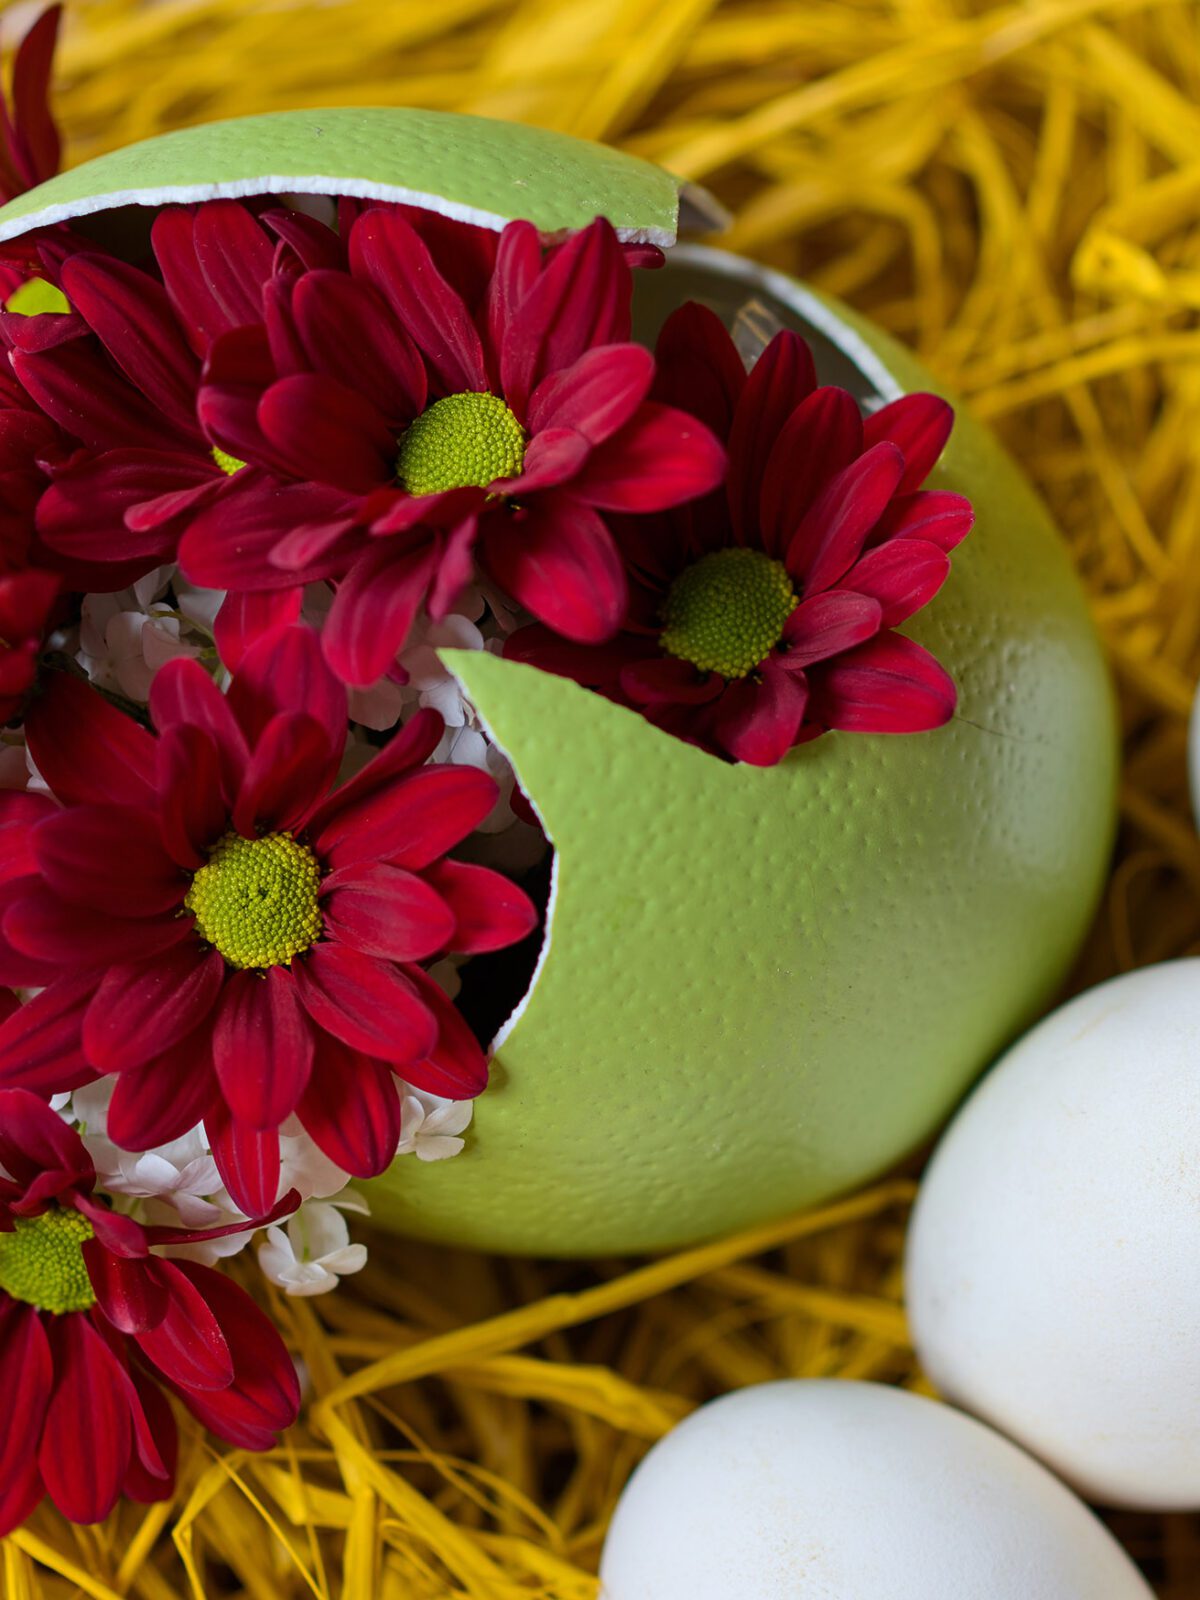 Getting creative: eggs with a floral surprise!